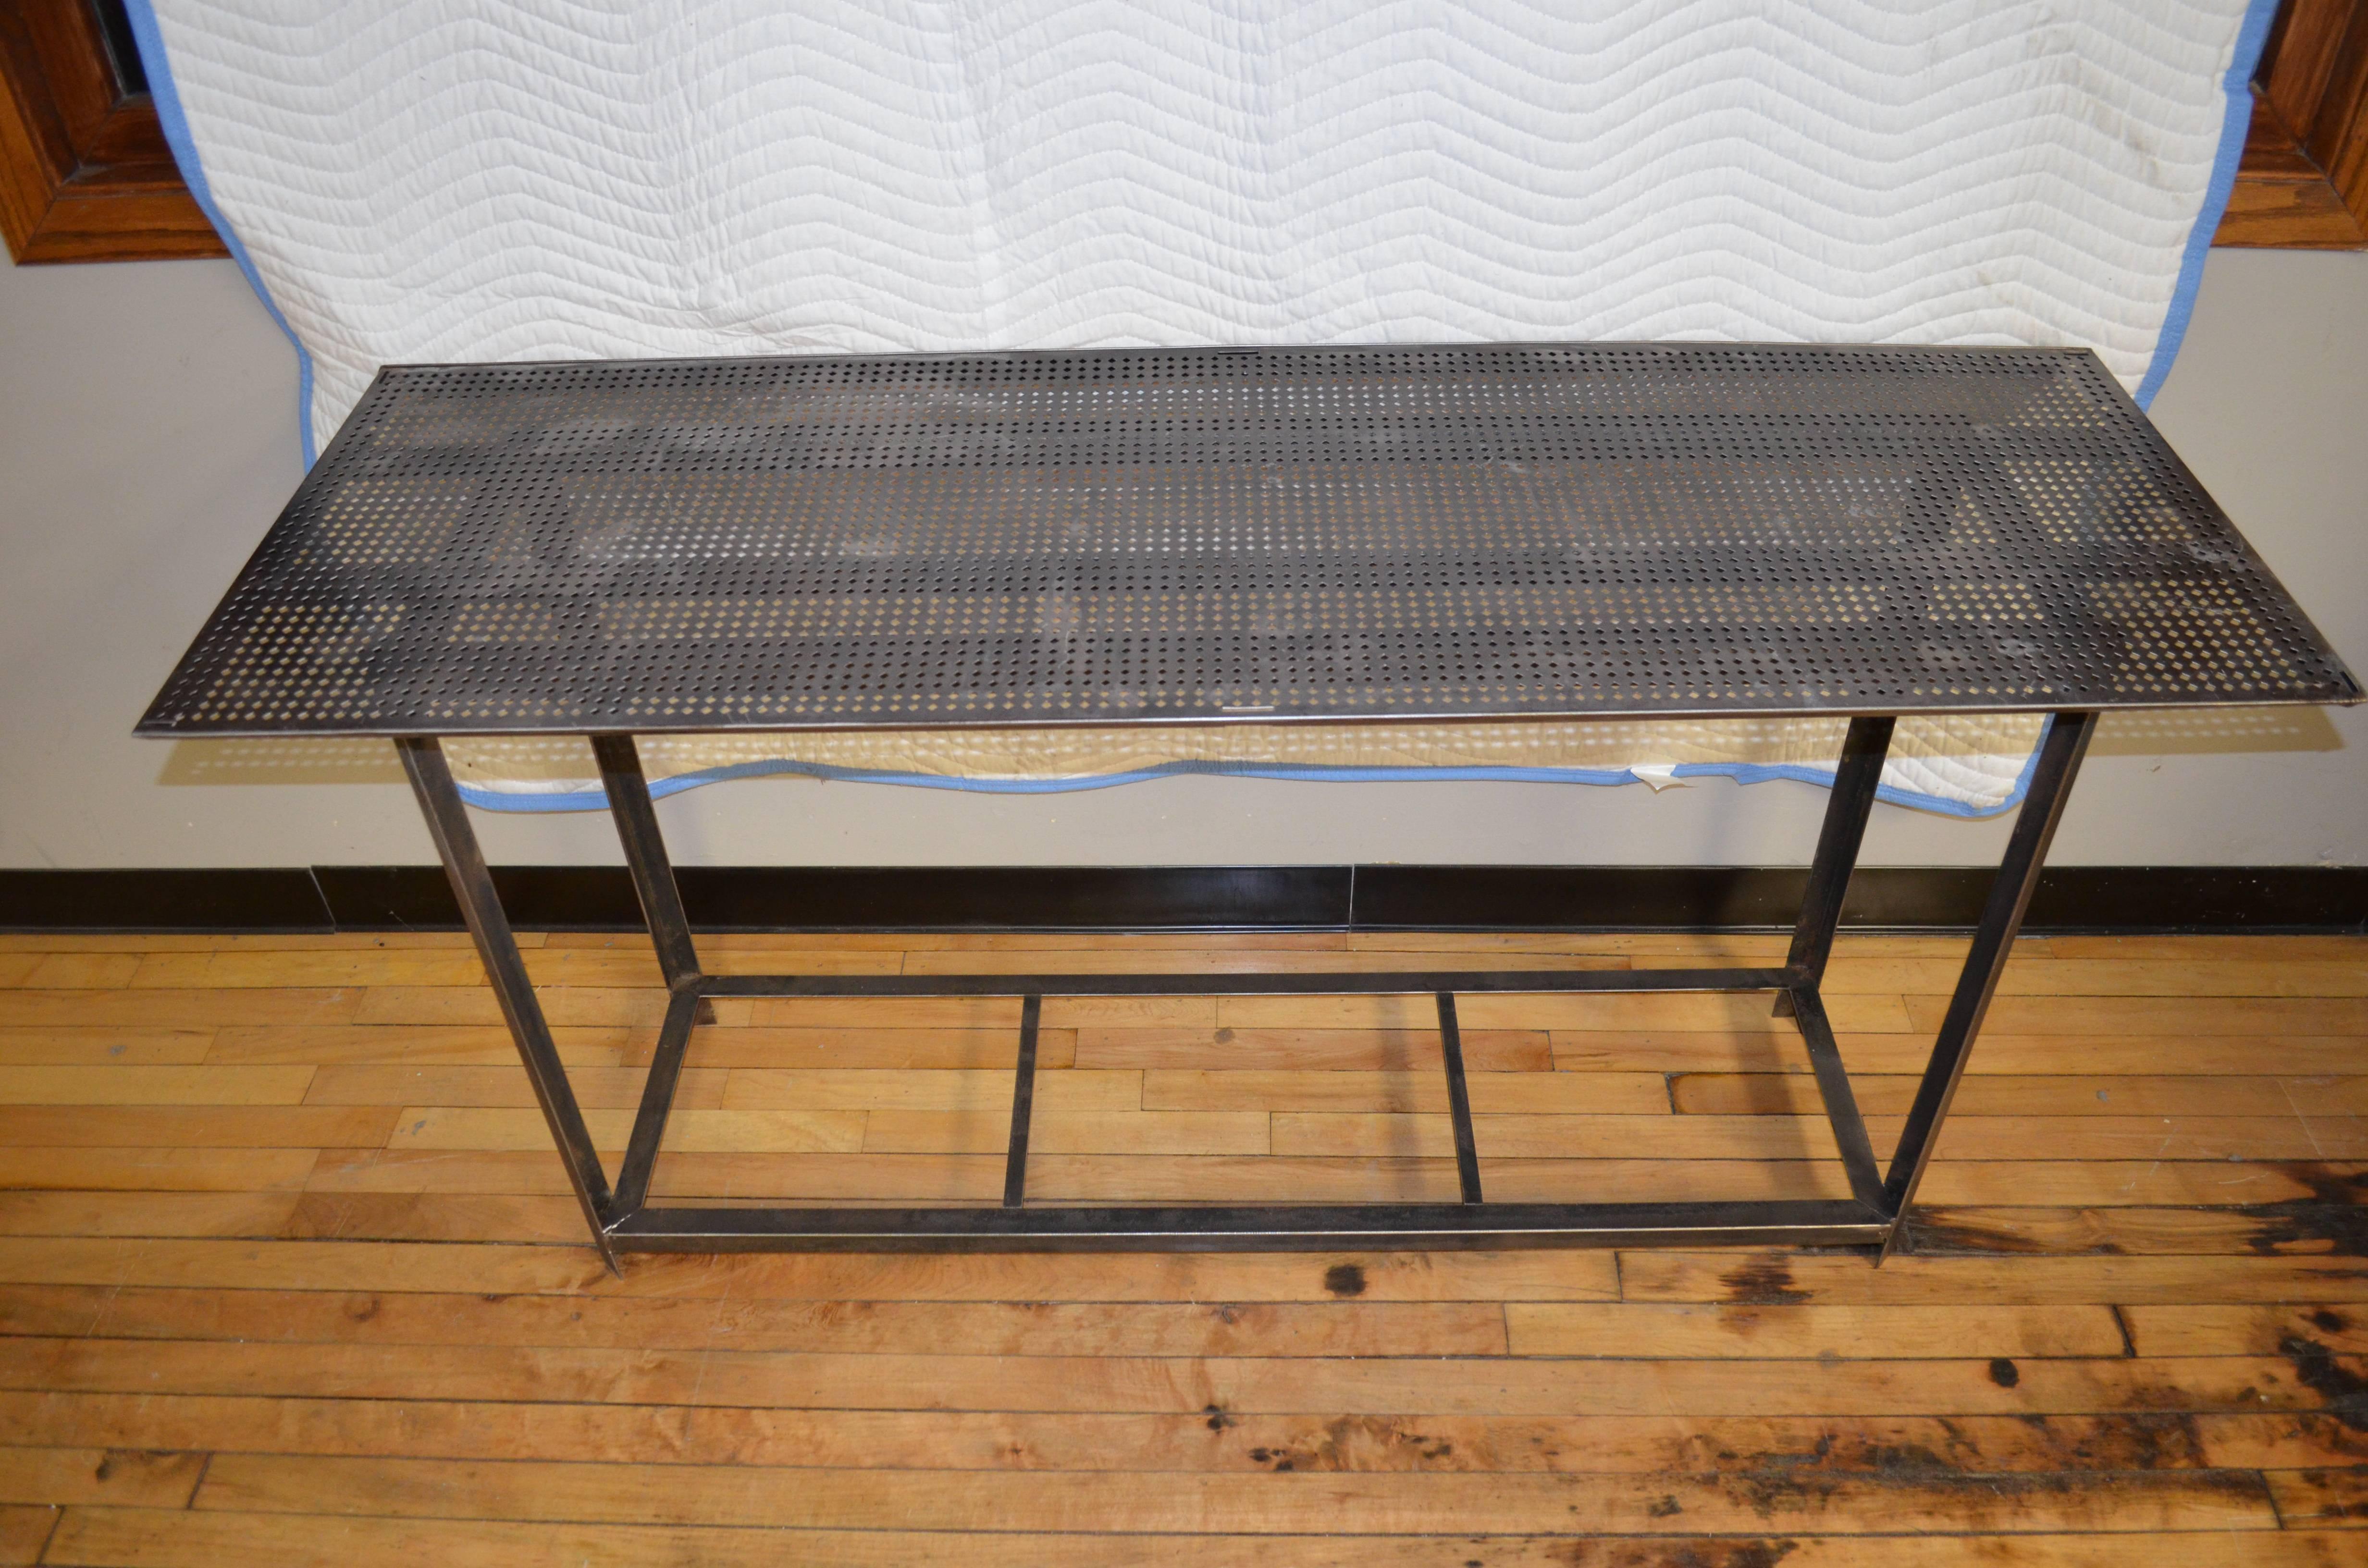 Factory work table with steel grate top stands sturdily on steel frame. Ideal as console table or plant stand. For an industrial table, this one has a wonderful light, airy quality.